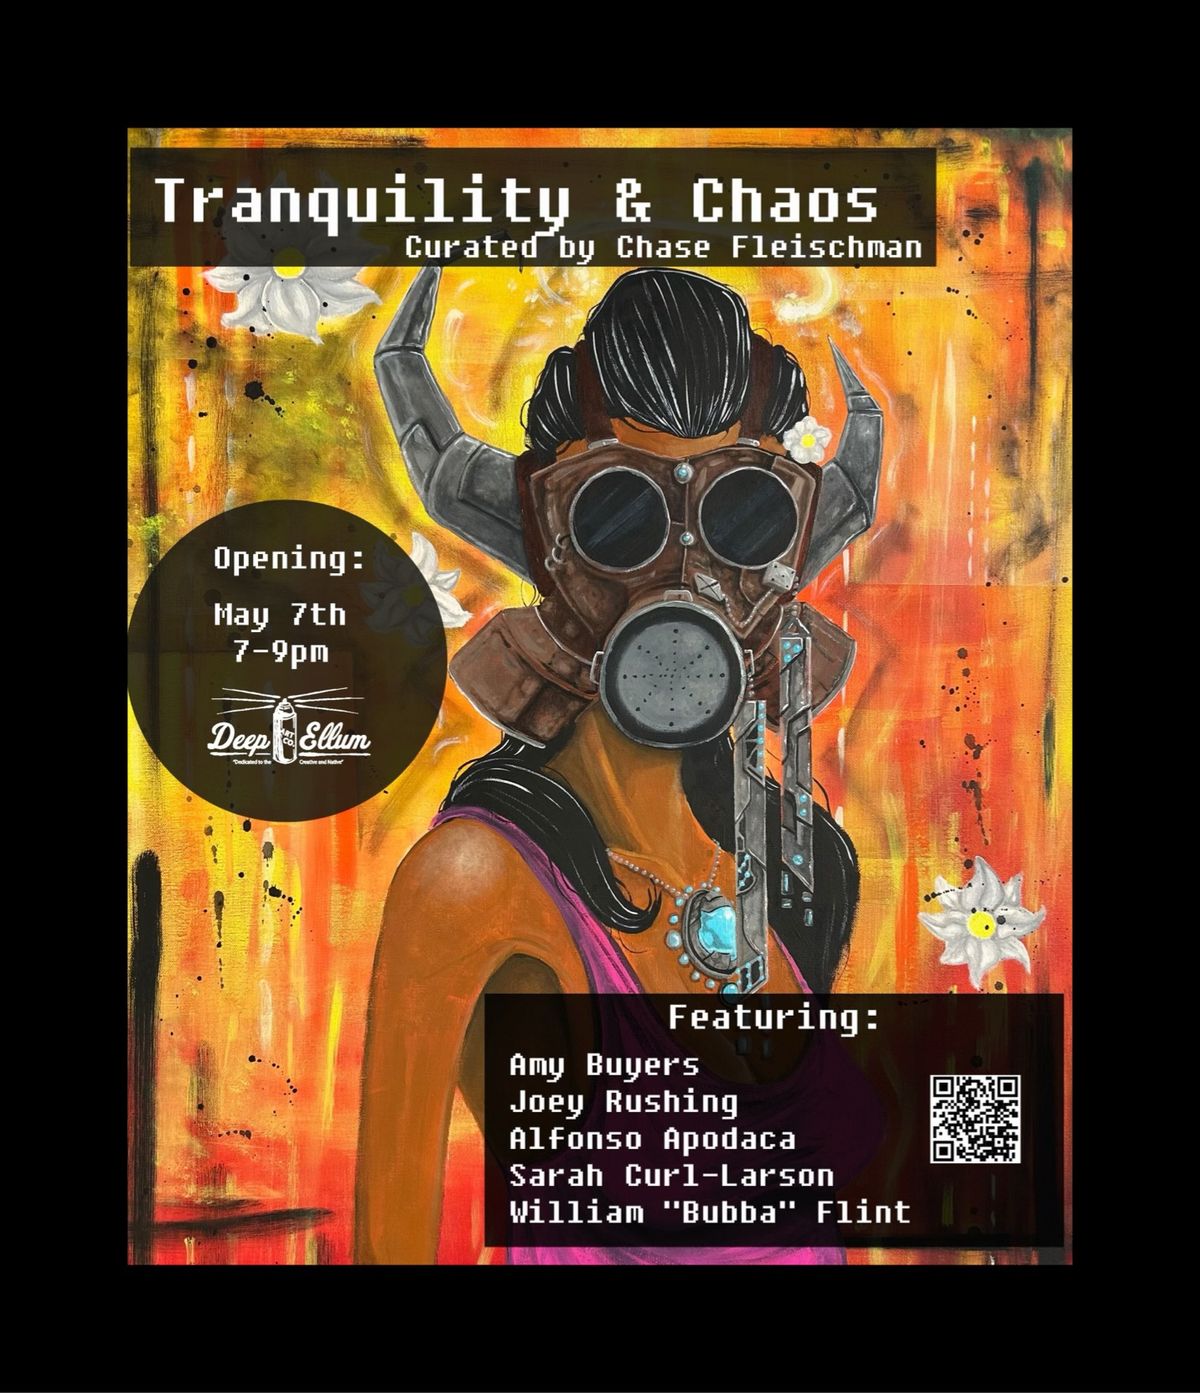 Tranquility & Chaos: An Art Exhibit Curated by Chase Fleischman